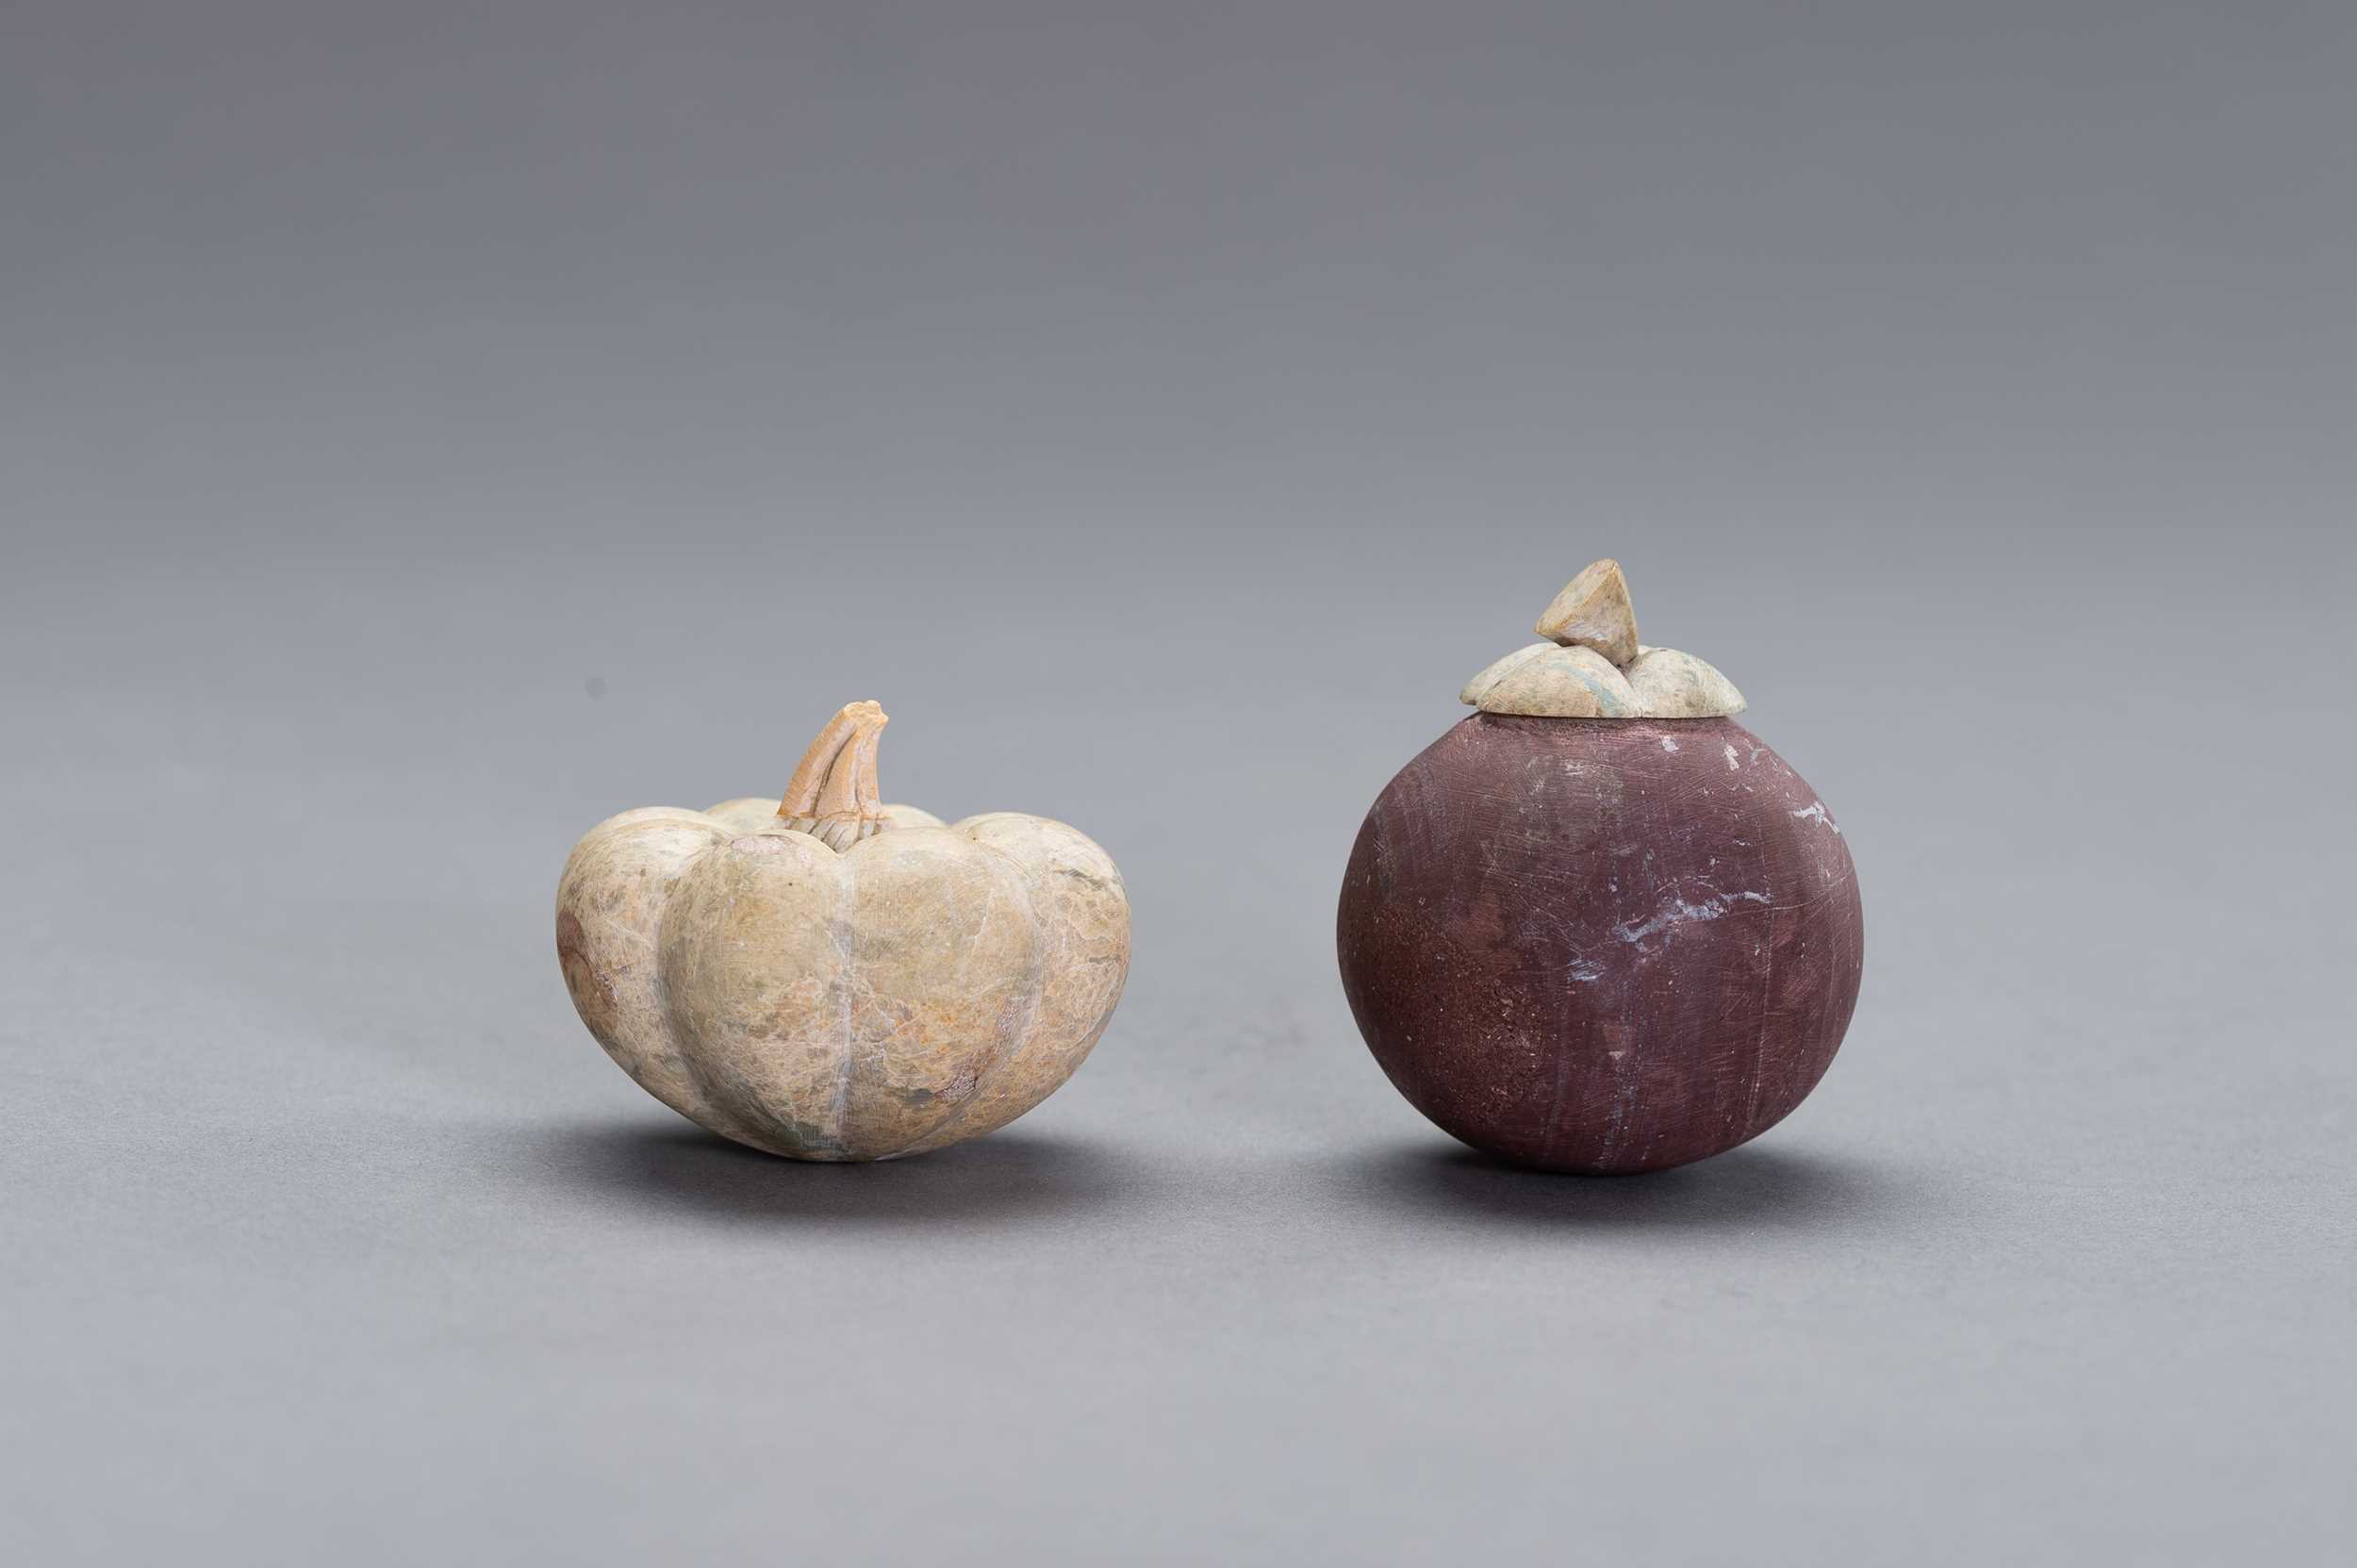 Lot 525 - TWO STONE CARVINGS OF FRUITS